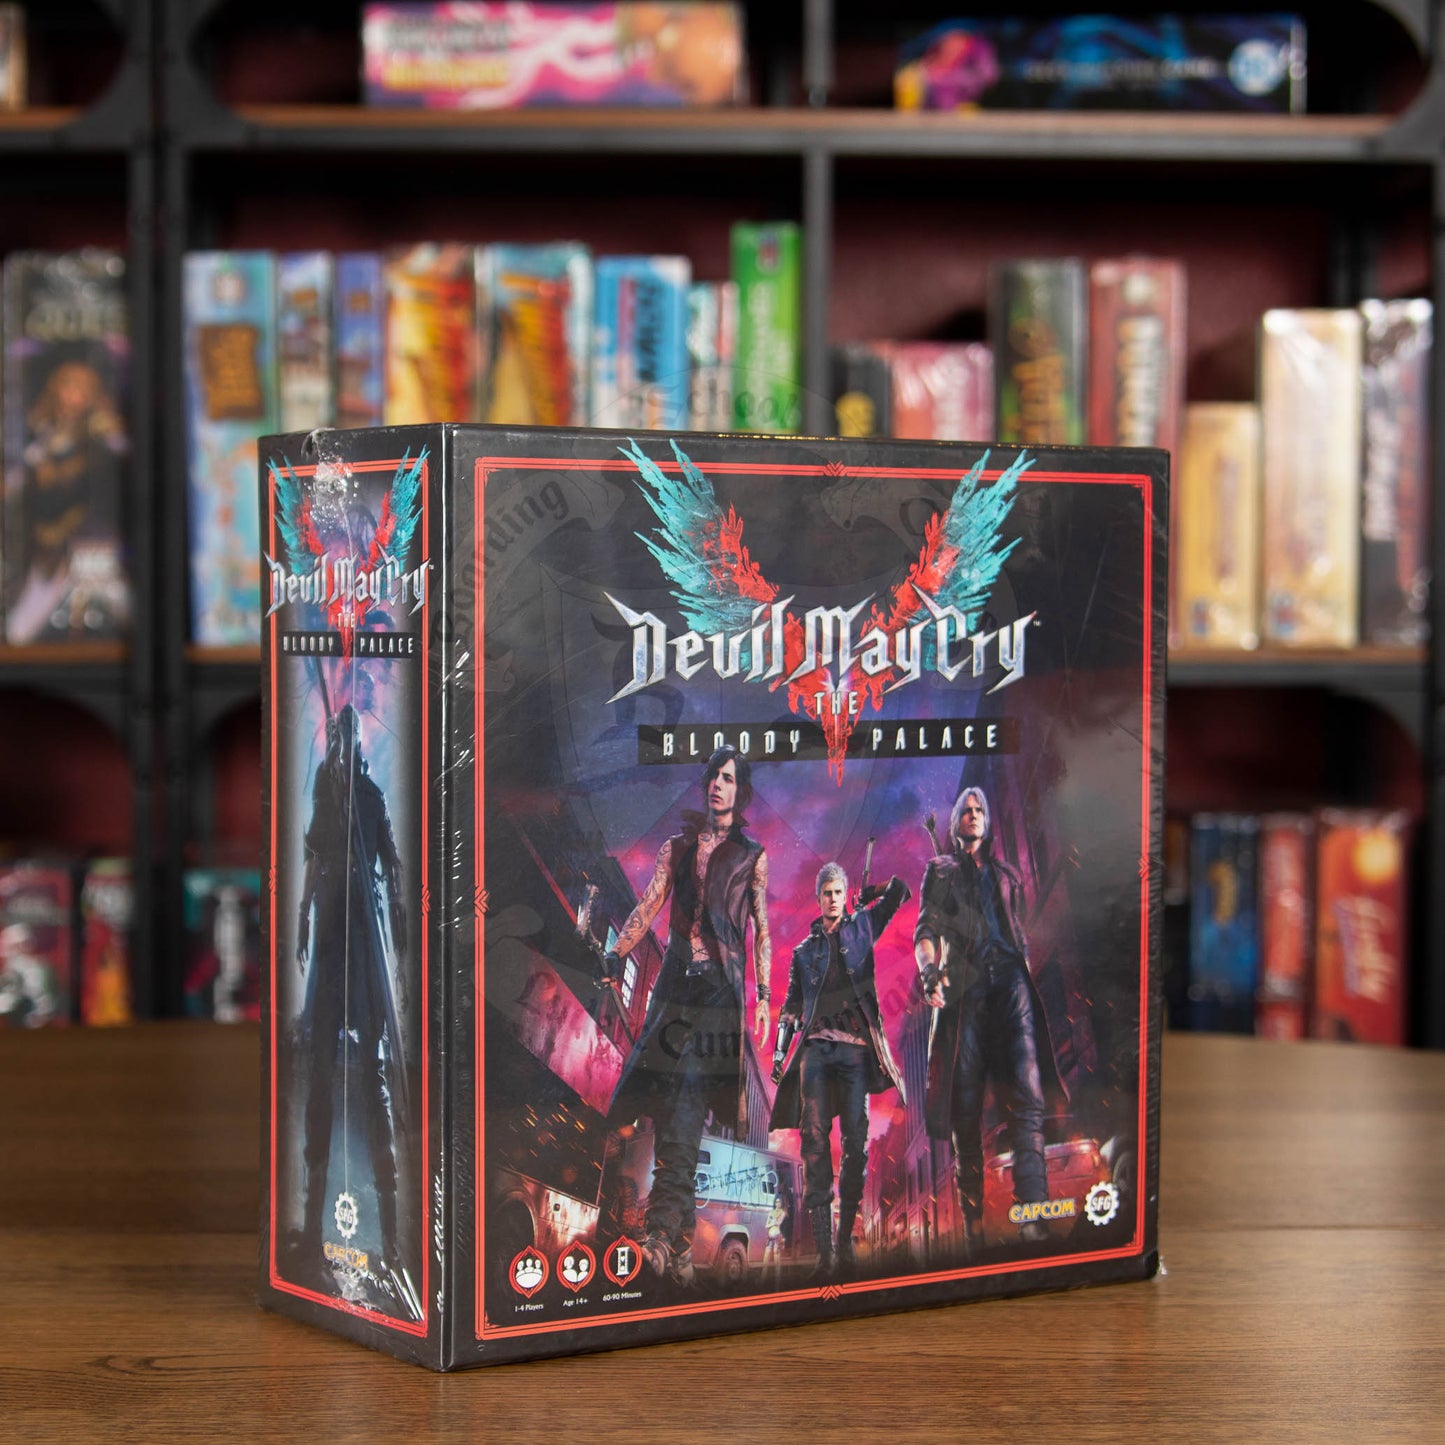 (BSG Certified USED) Devil May Cry: The Bloody Palace